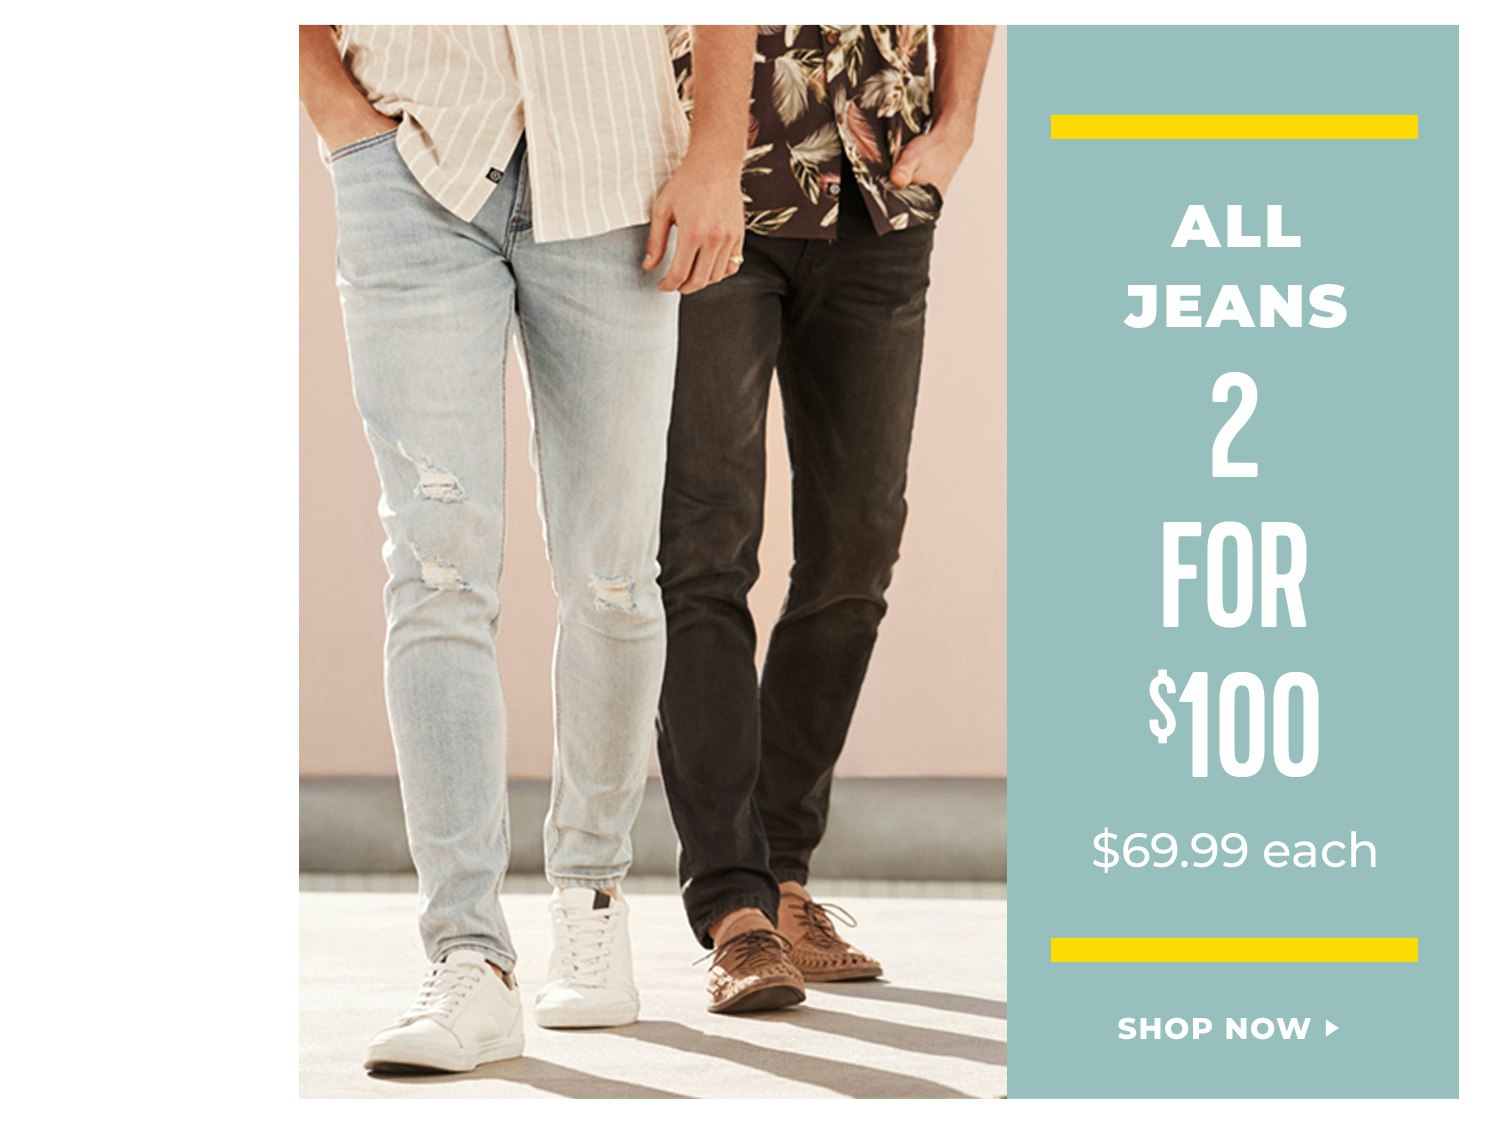 Jeans 2 for $100